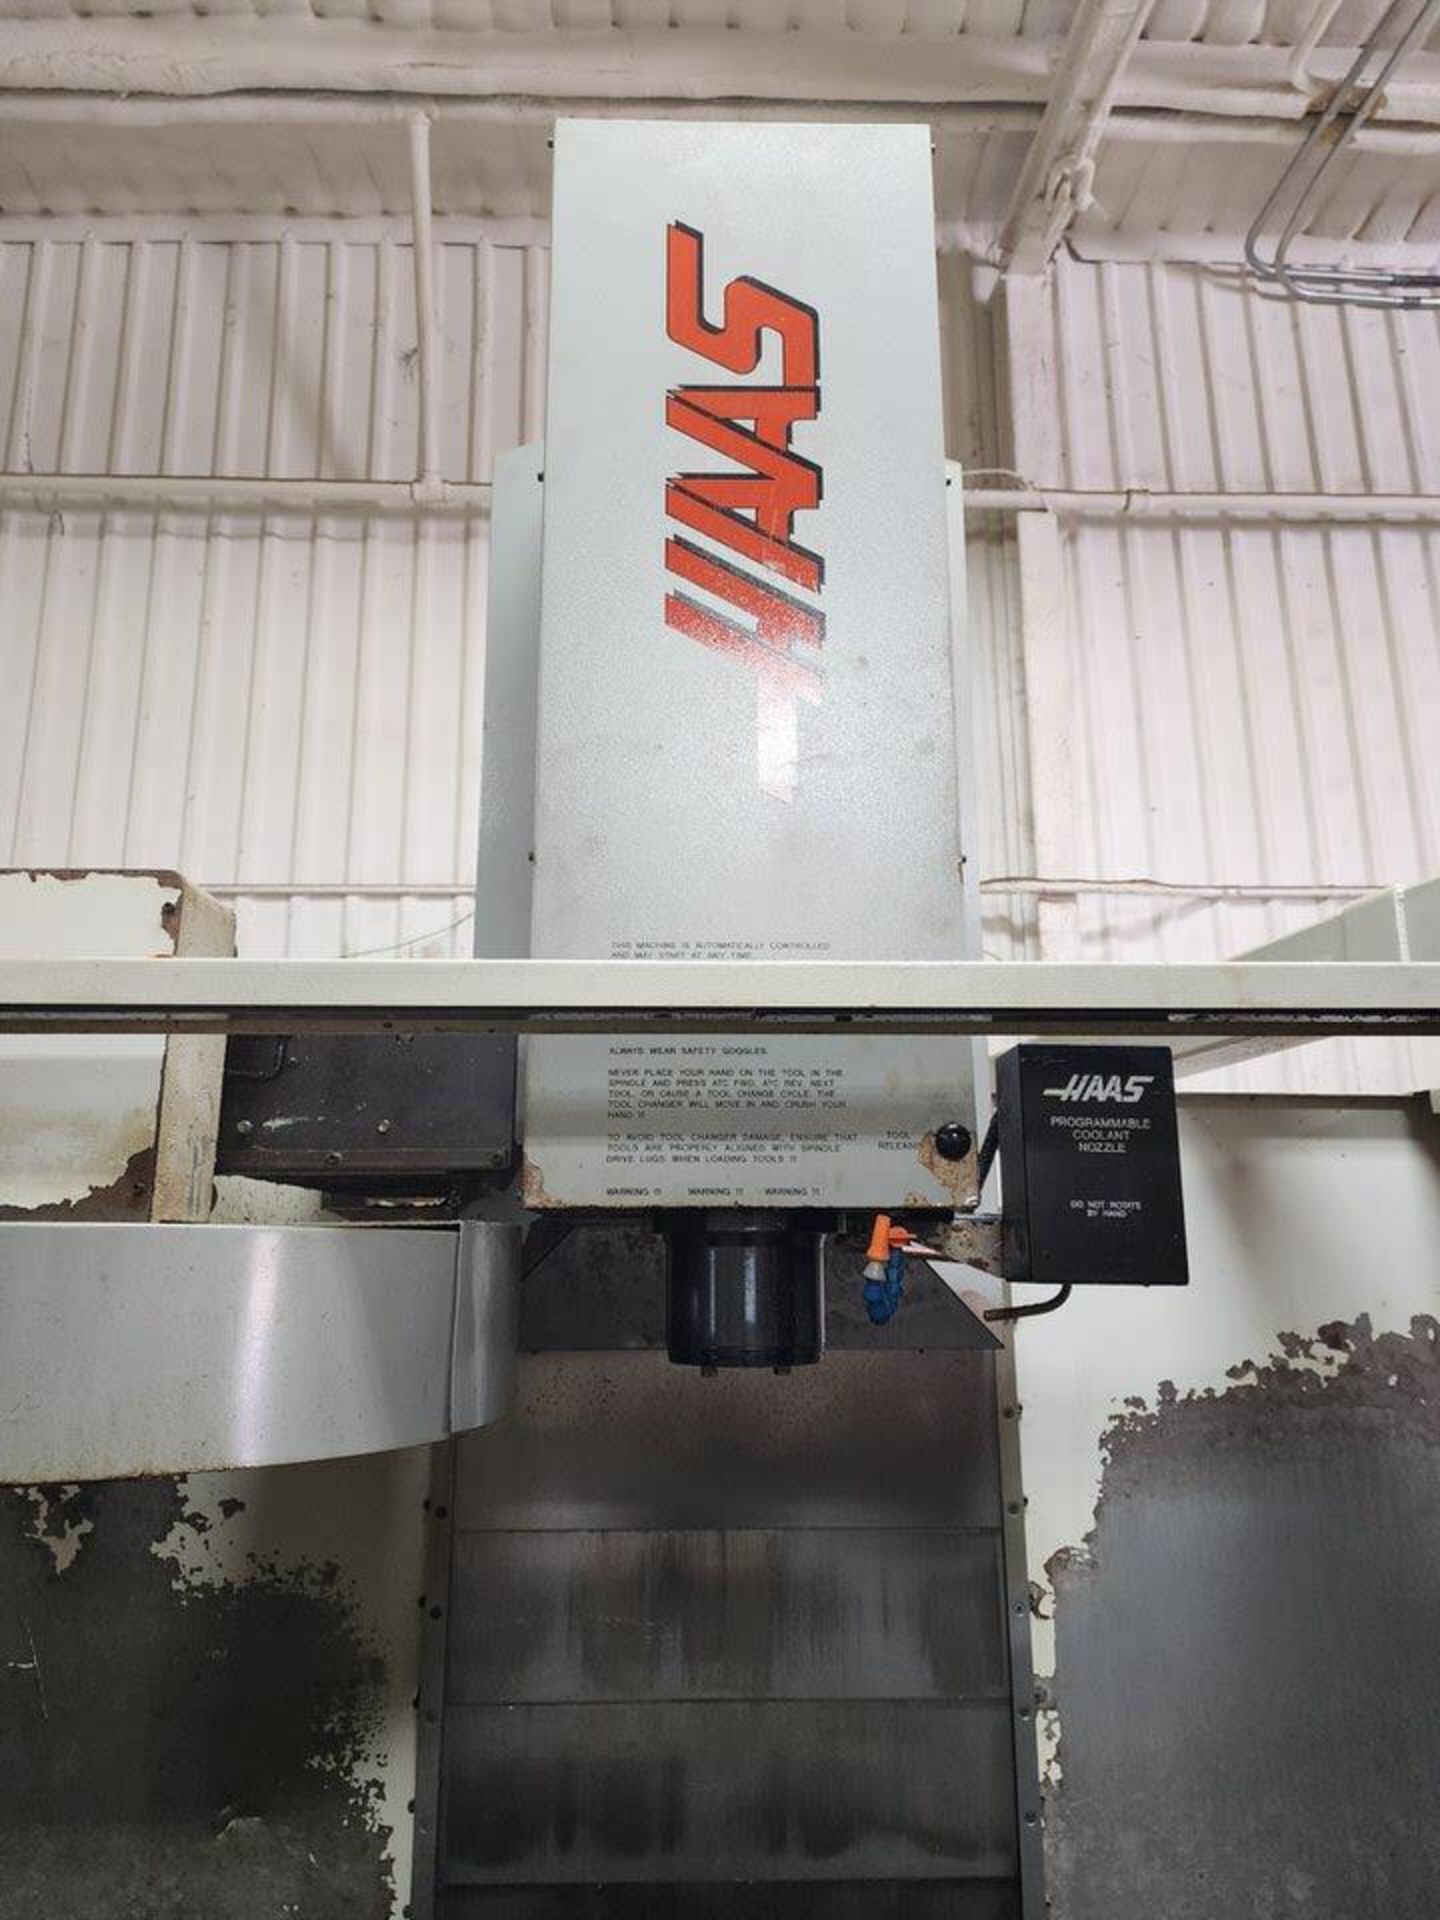 1996 Haas VF3 Milling Machine 208/230V, 3PH, 50/60HZ, Full Load: 40A; Largest Load: 30A; - Image 9 of 18